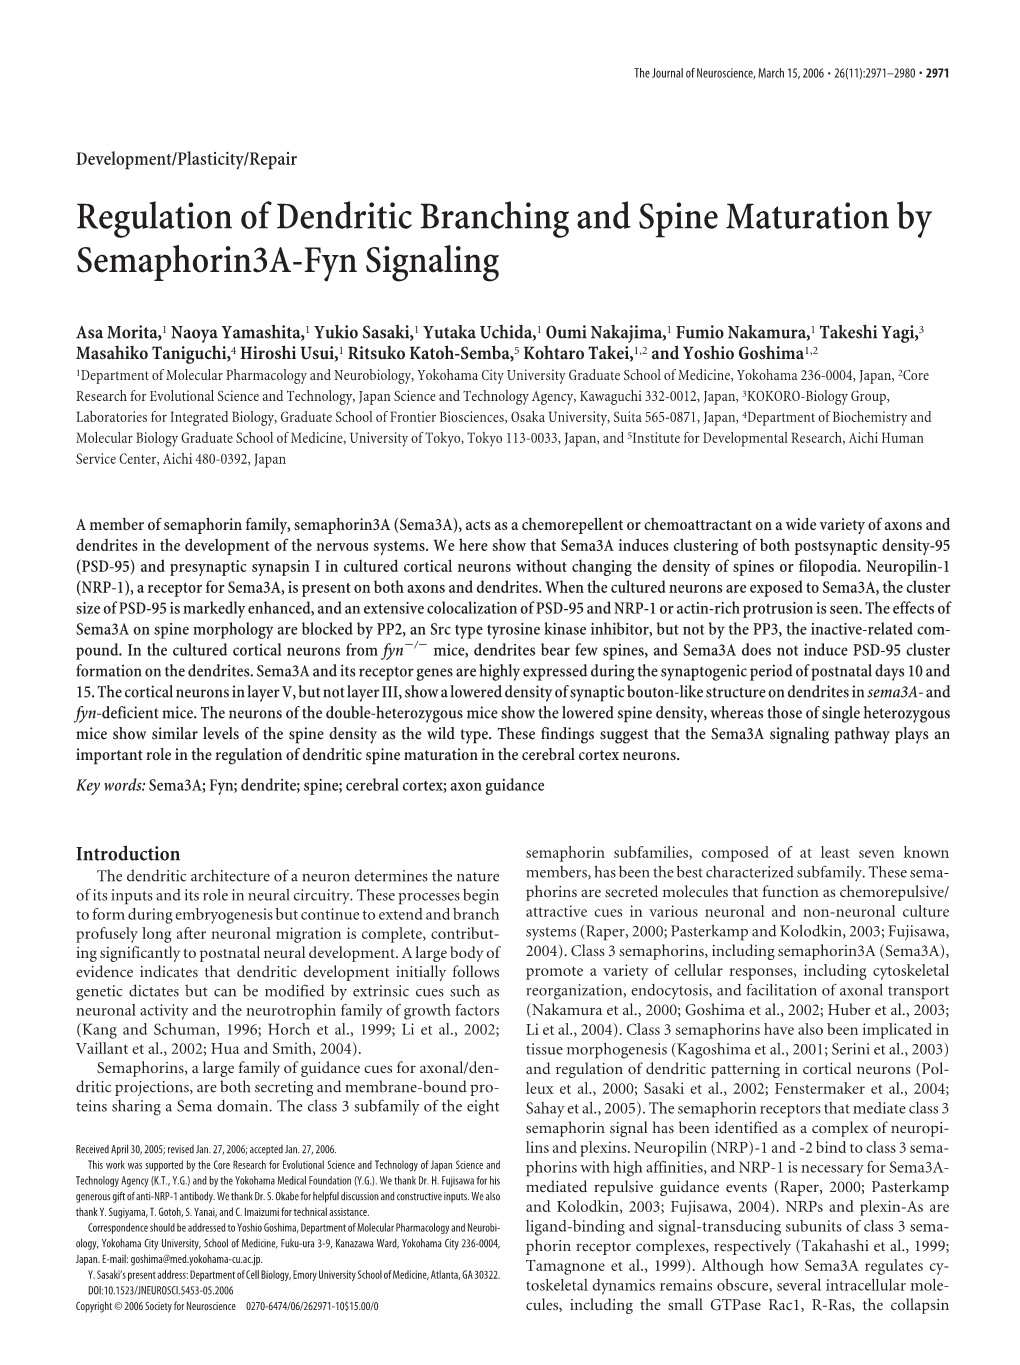 Regulation of Dendritic Branching and Spine Maturation by Semaphorin3a-Fyn Signaling